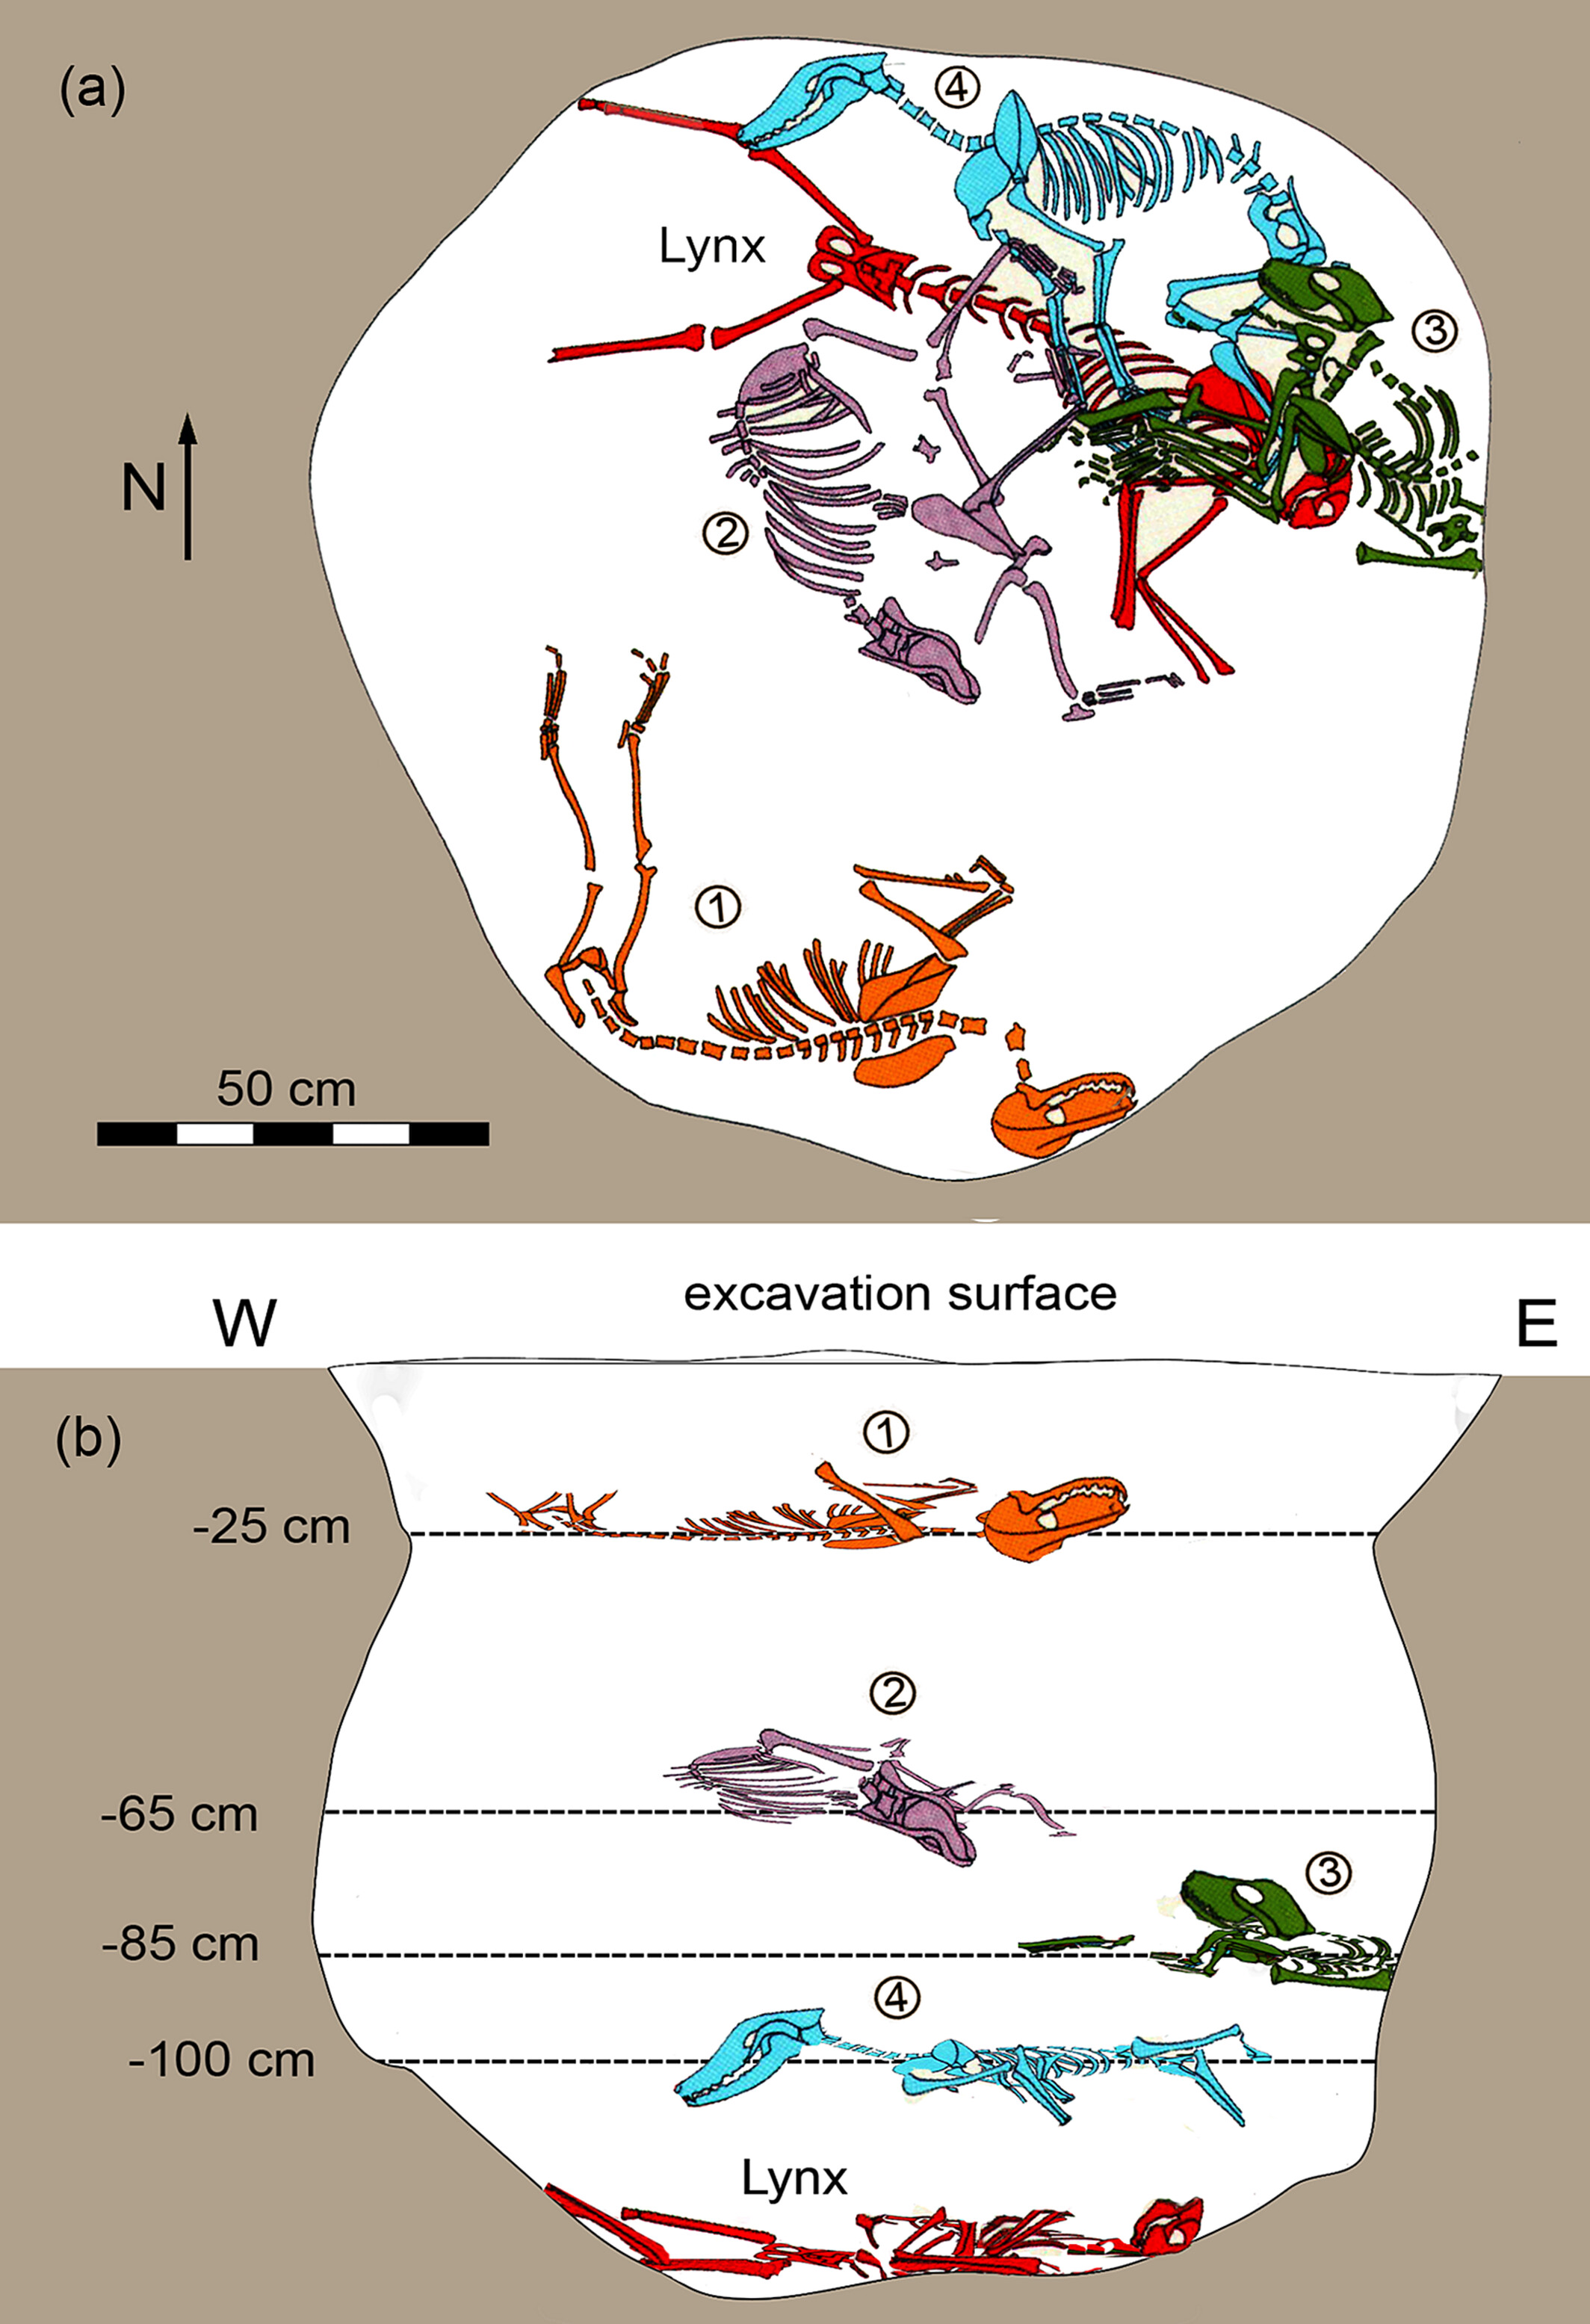 Two diagrams showing the arrangement of the lynx and dog skeletons in the pit. The first image is a top-down perspective, showing three of the dogs laying on top of the lynx's remains while the fourth dog is further away. The second diagram shows the pit as a cross section and indicated the distance between the animals as they were buried. 